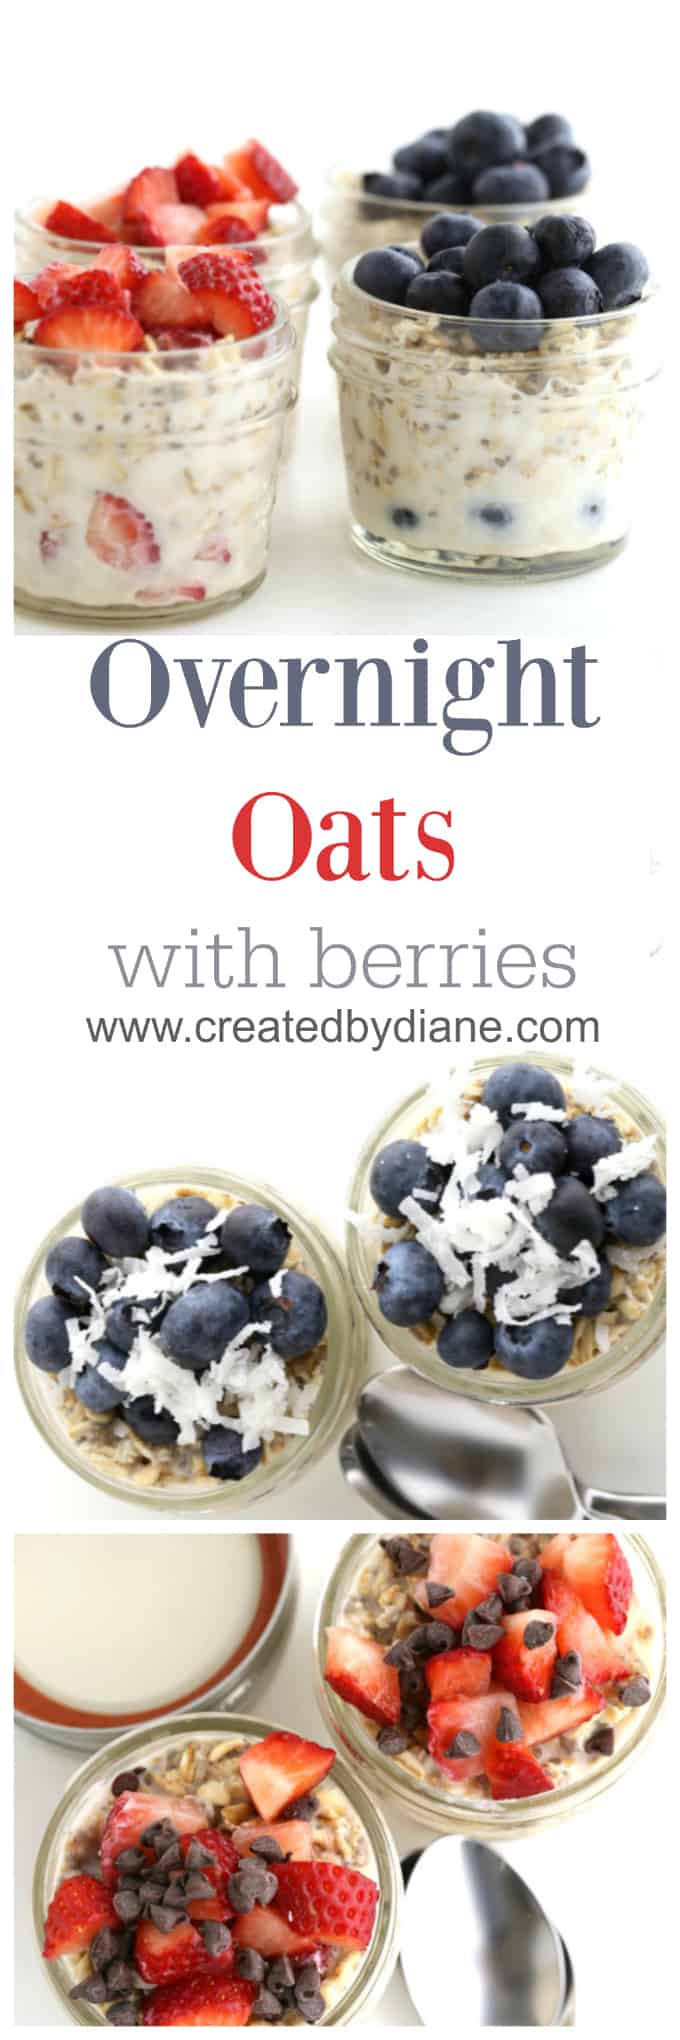 overnight oats with berries a perfect fast breakfast for school days, late sleepers, night owls, breakfast www.createdbydiane.com